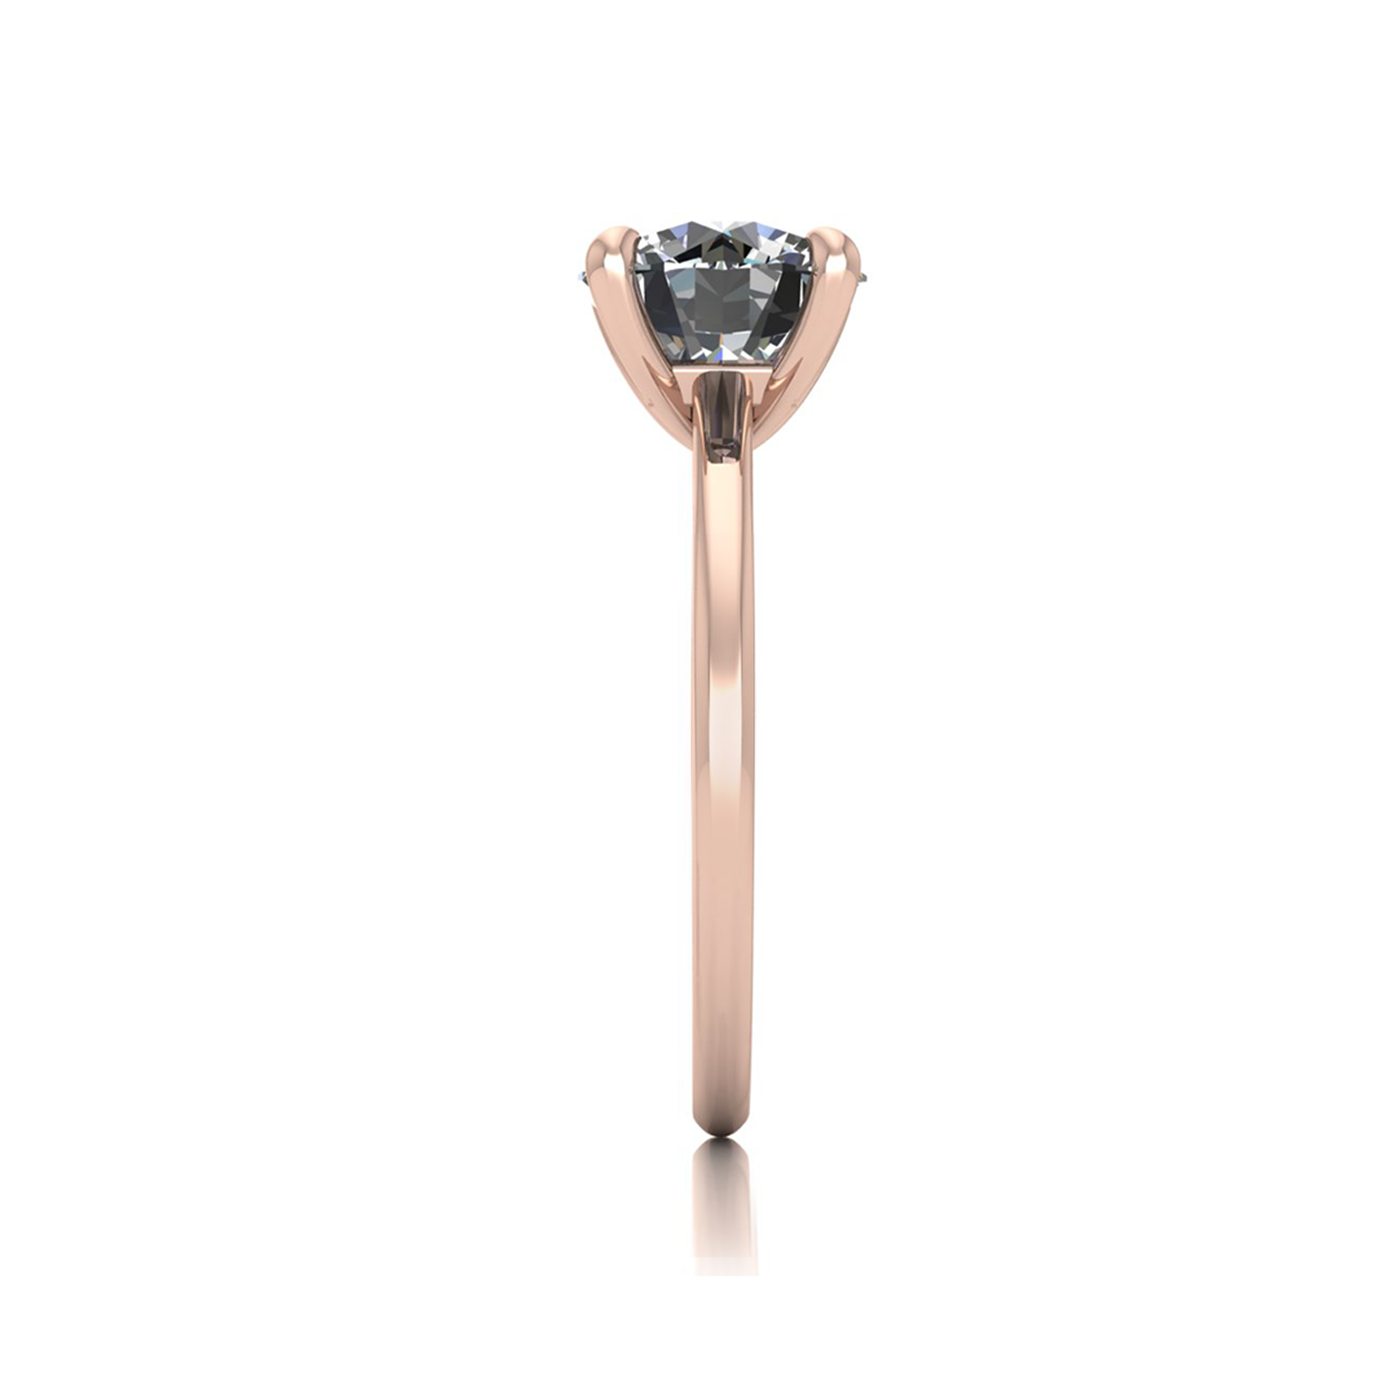 18k rose gold  0,30 ct 4 prongs solitaire round cut diamond engagement ring with whisper thin band